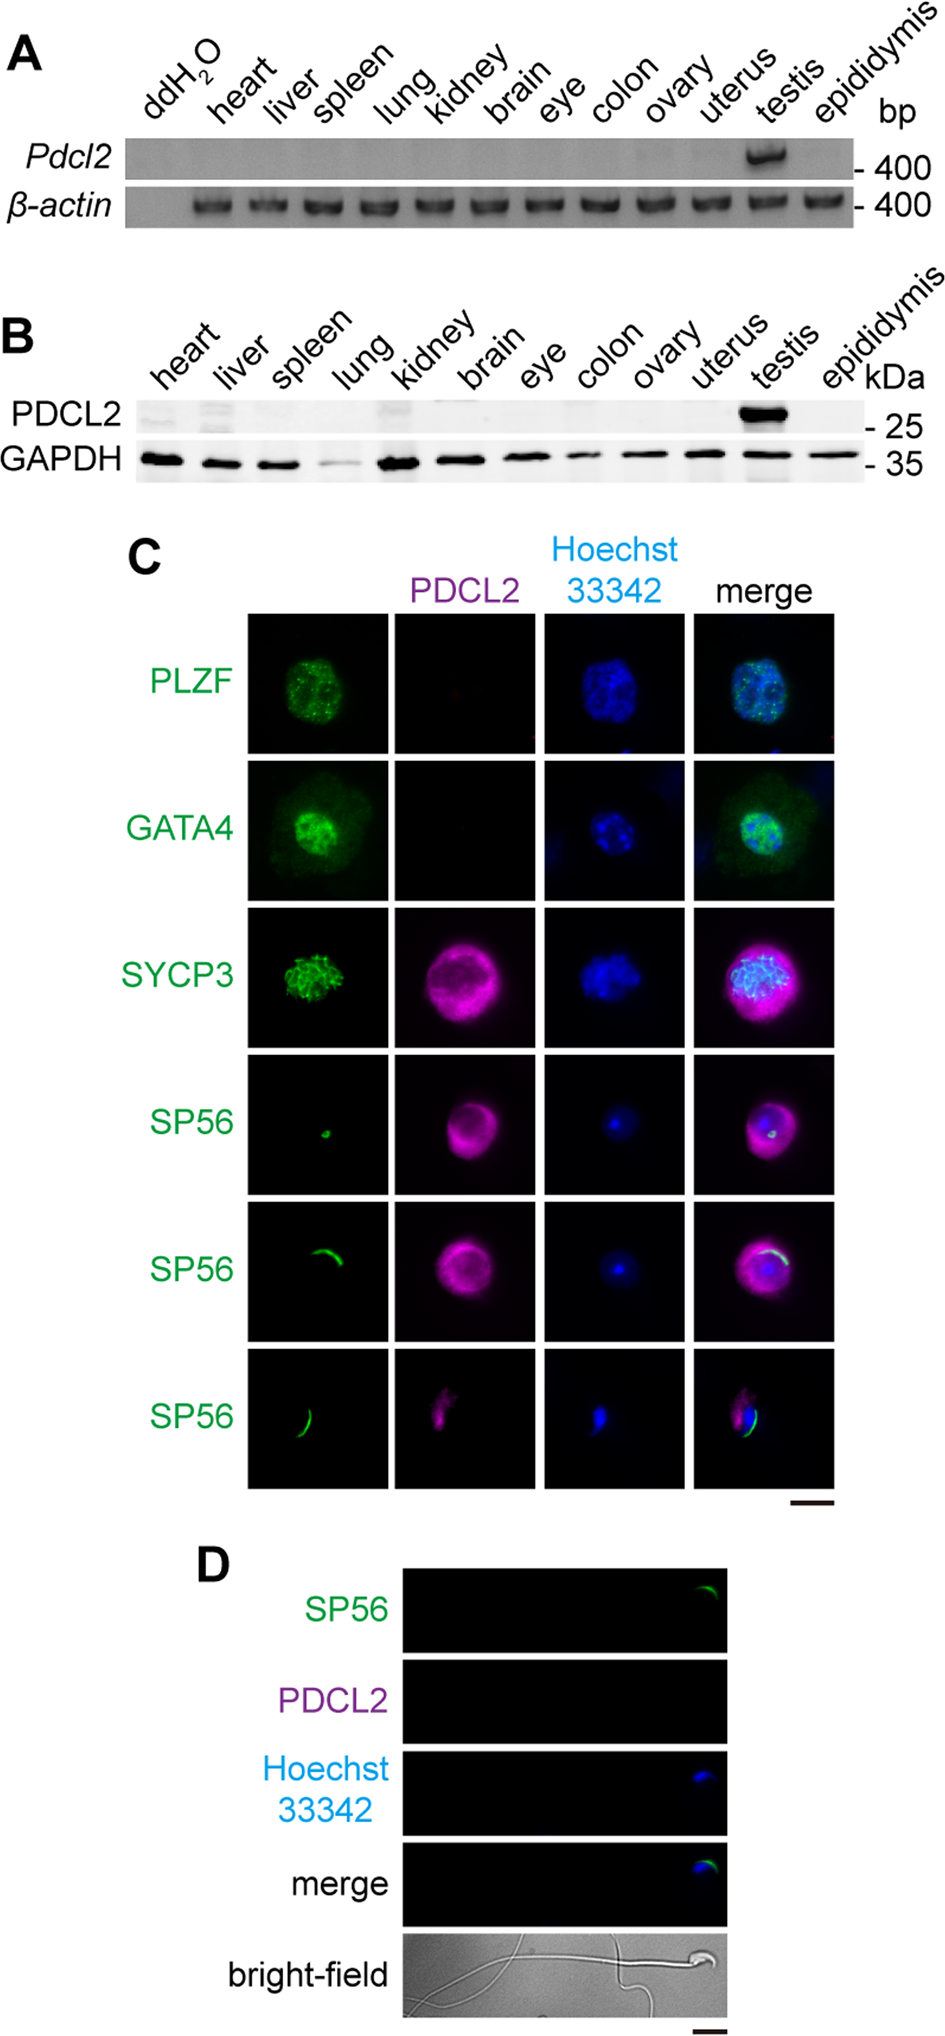 PDCL2 is essential for spermiogenesis and male fertility in mice